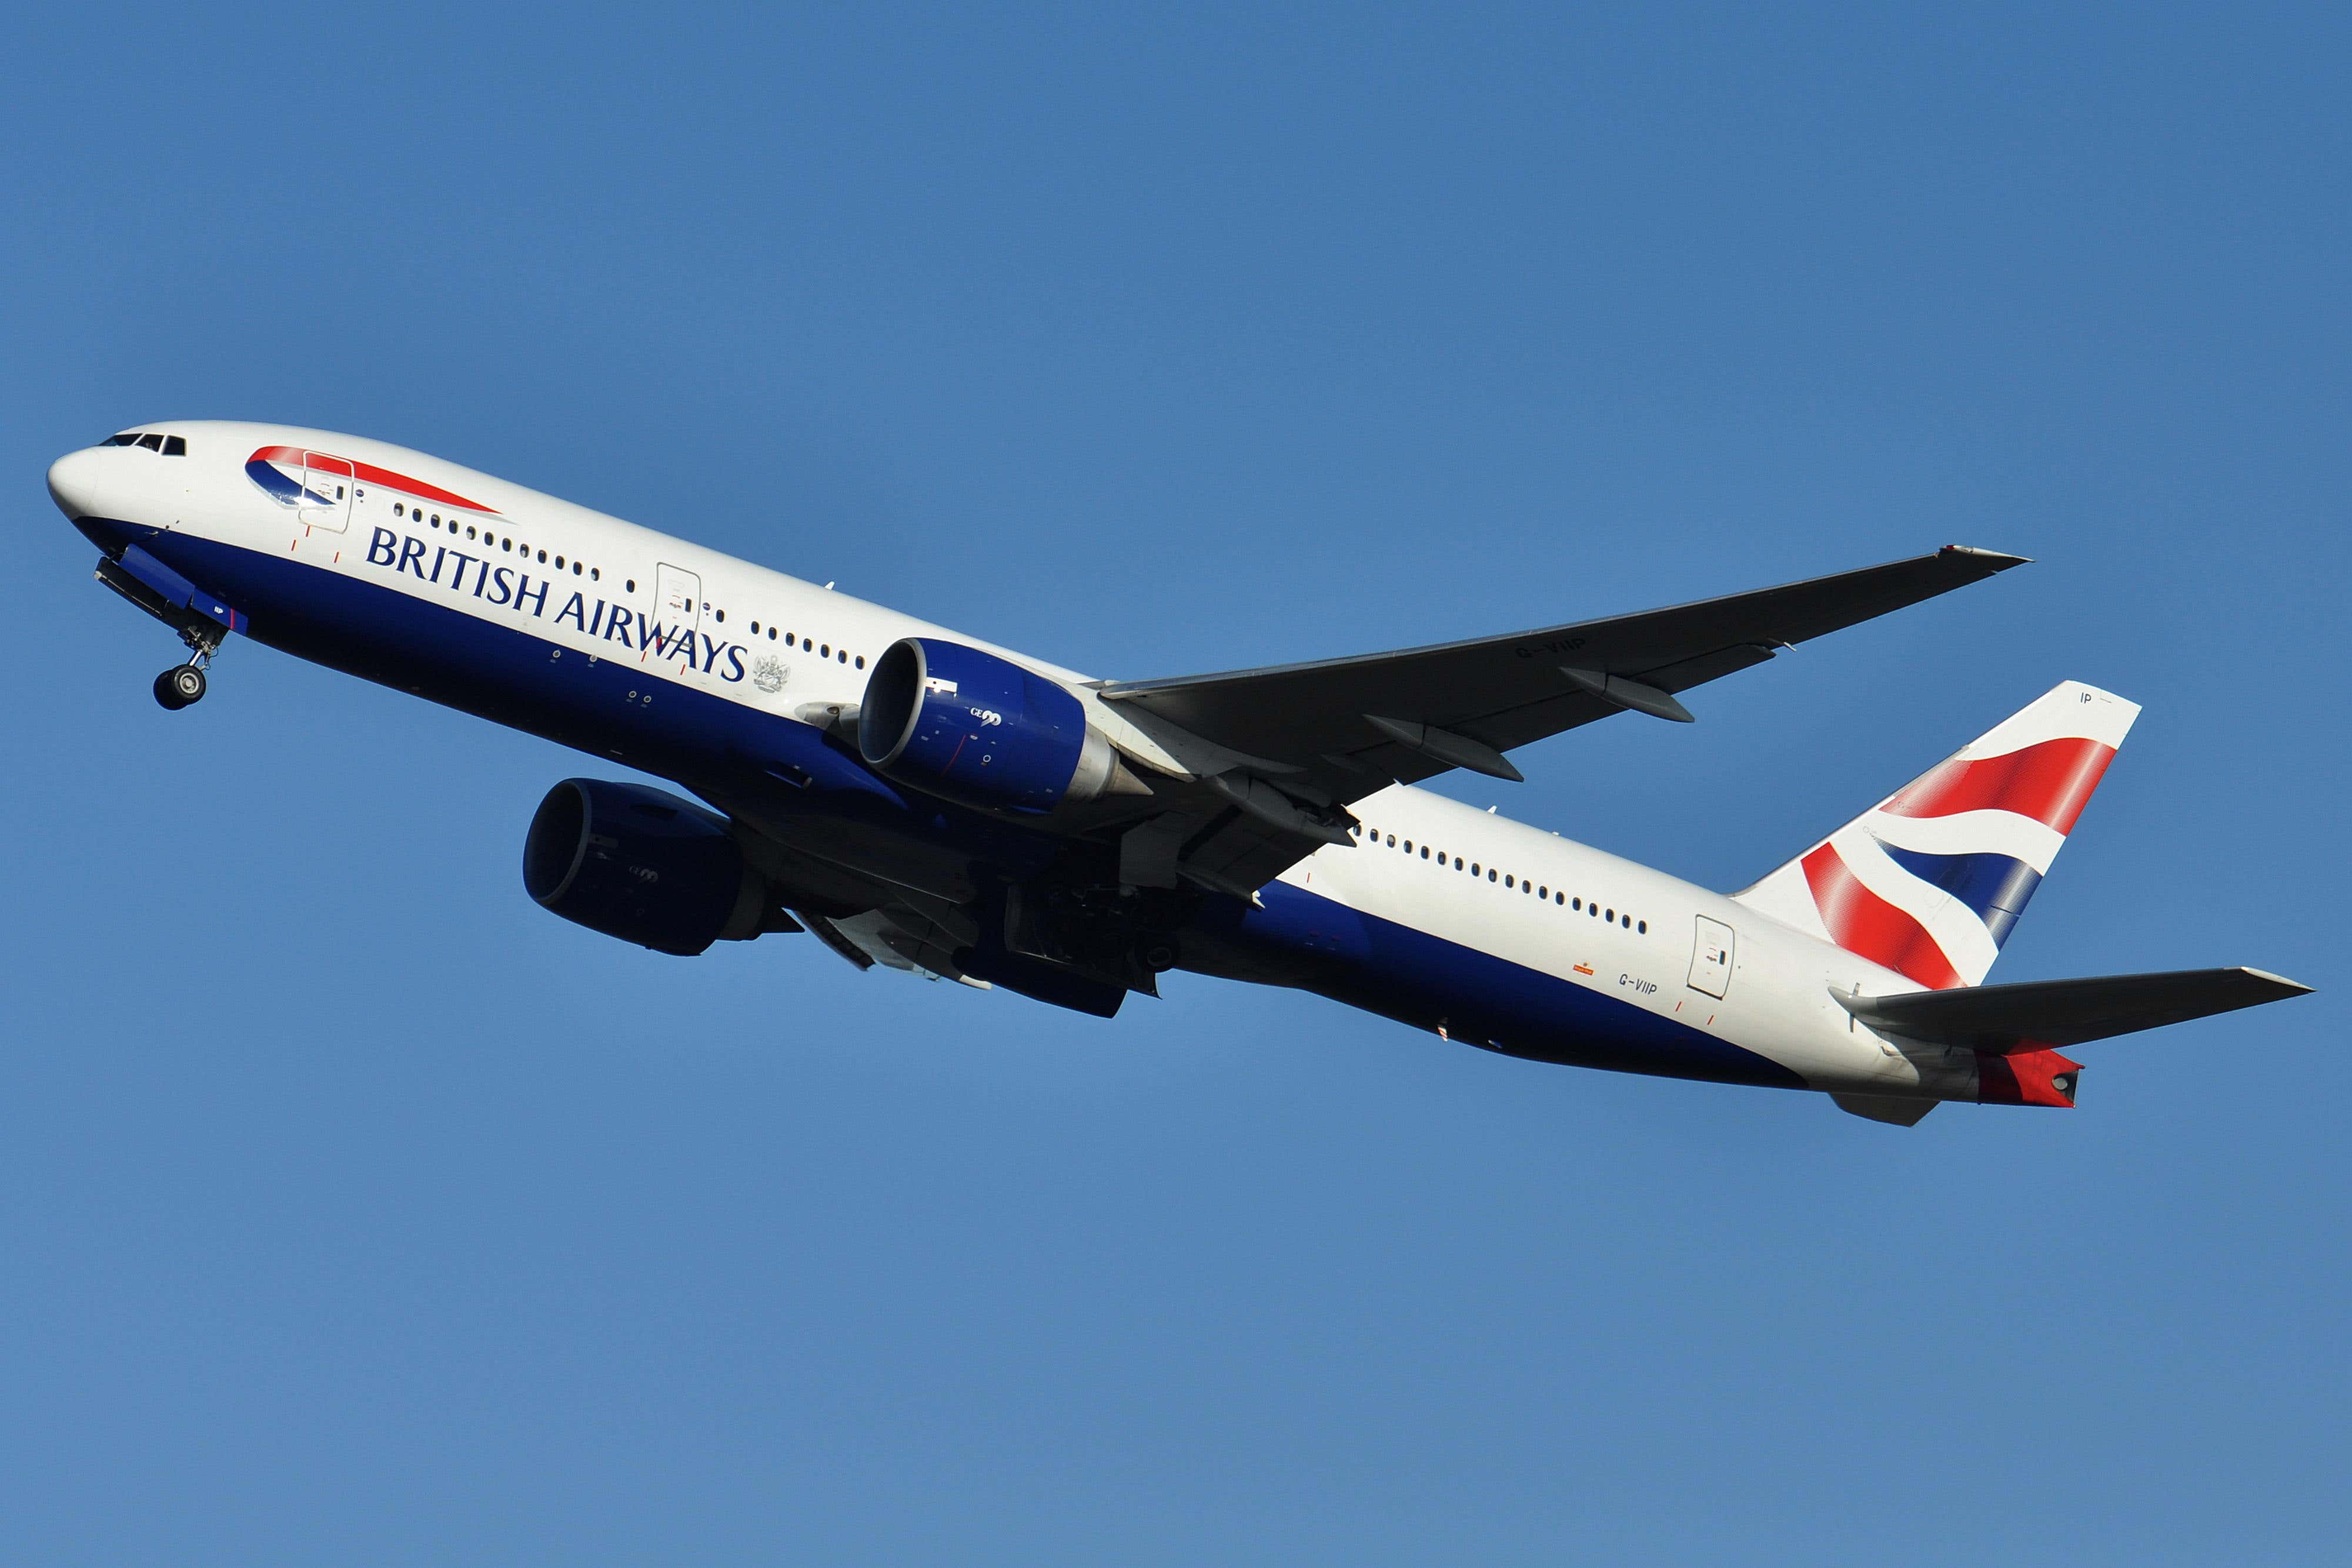 The runway at Gatwick was closed following a problem with a departing BA plane